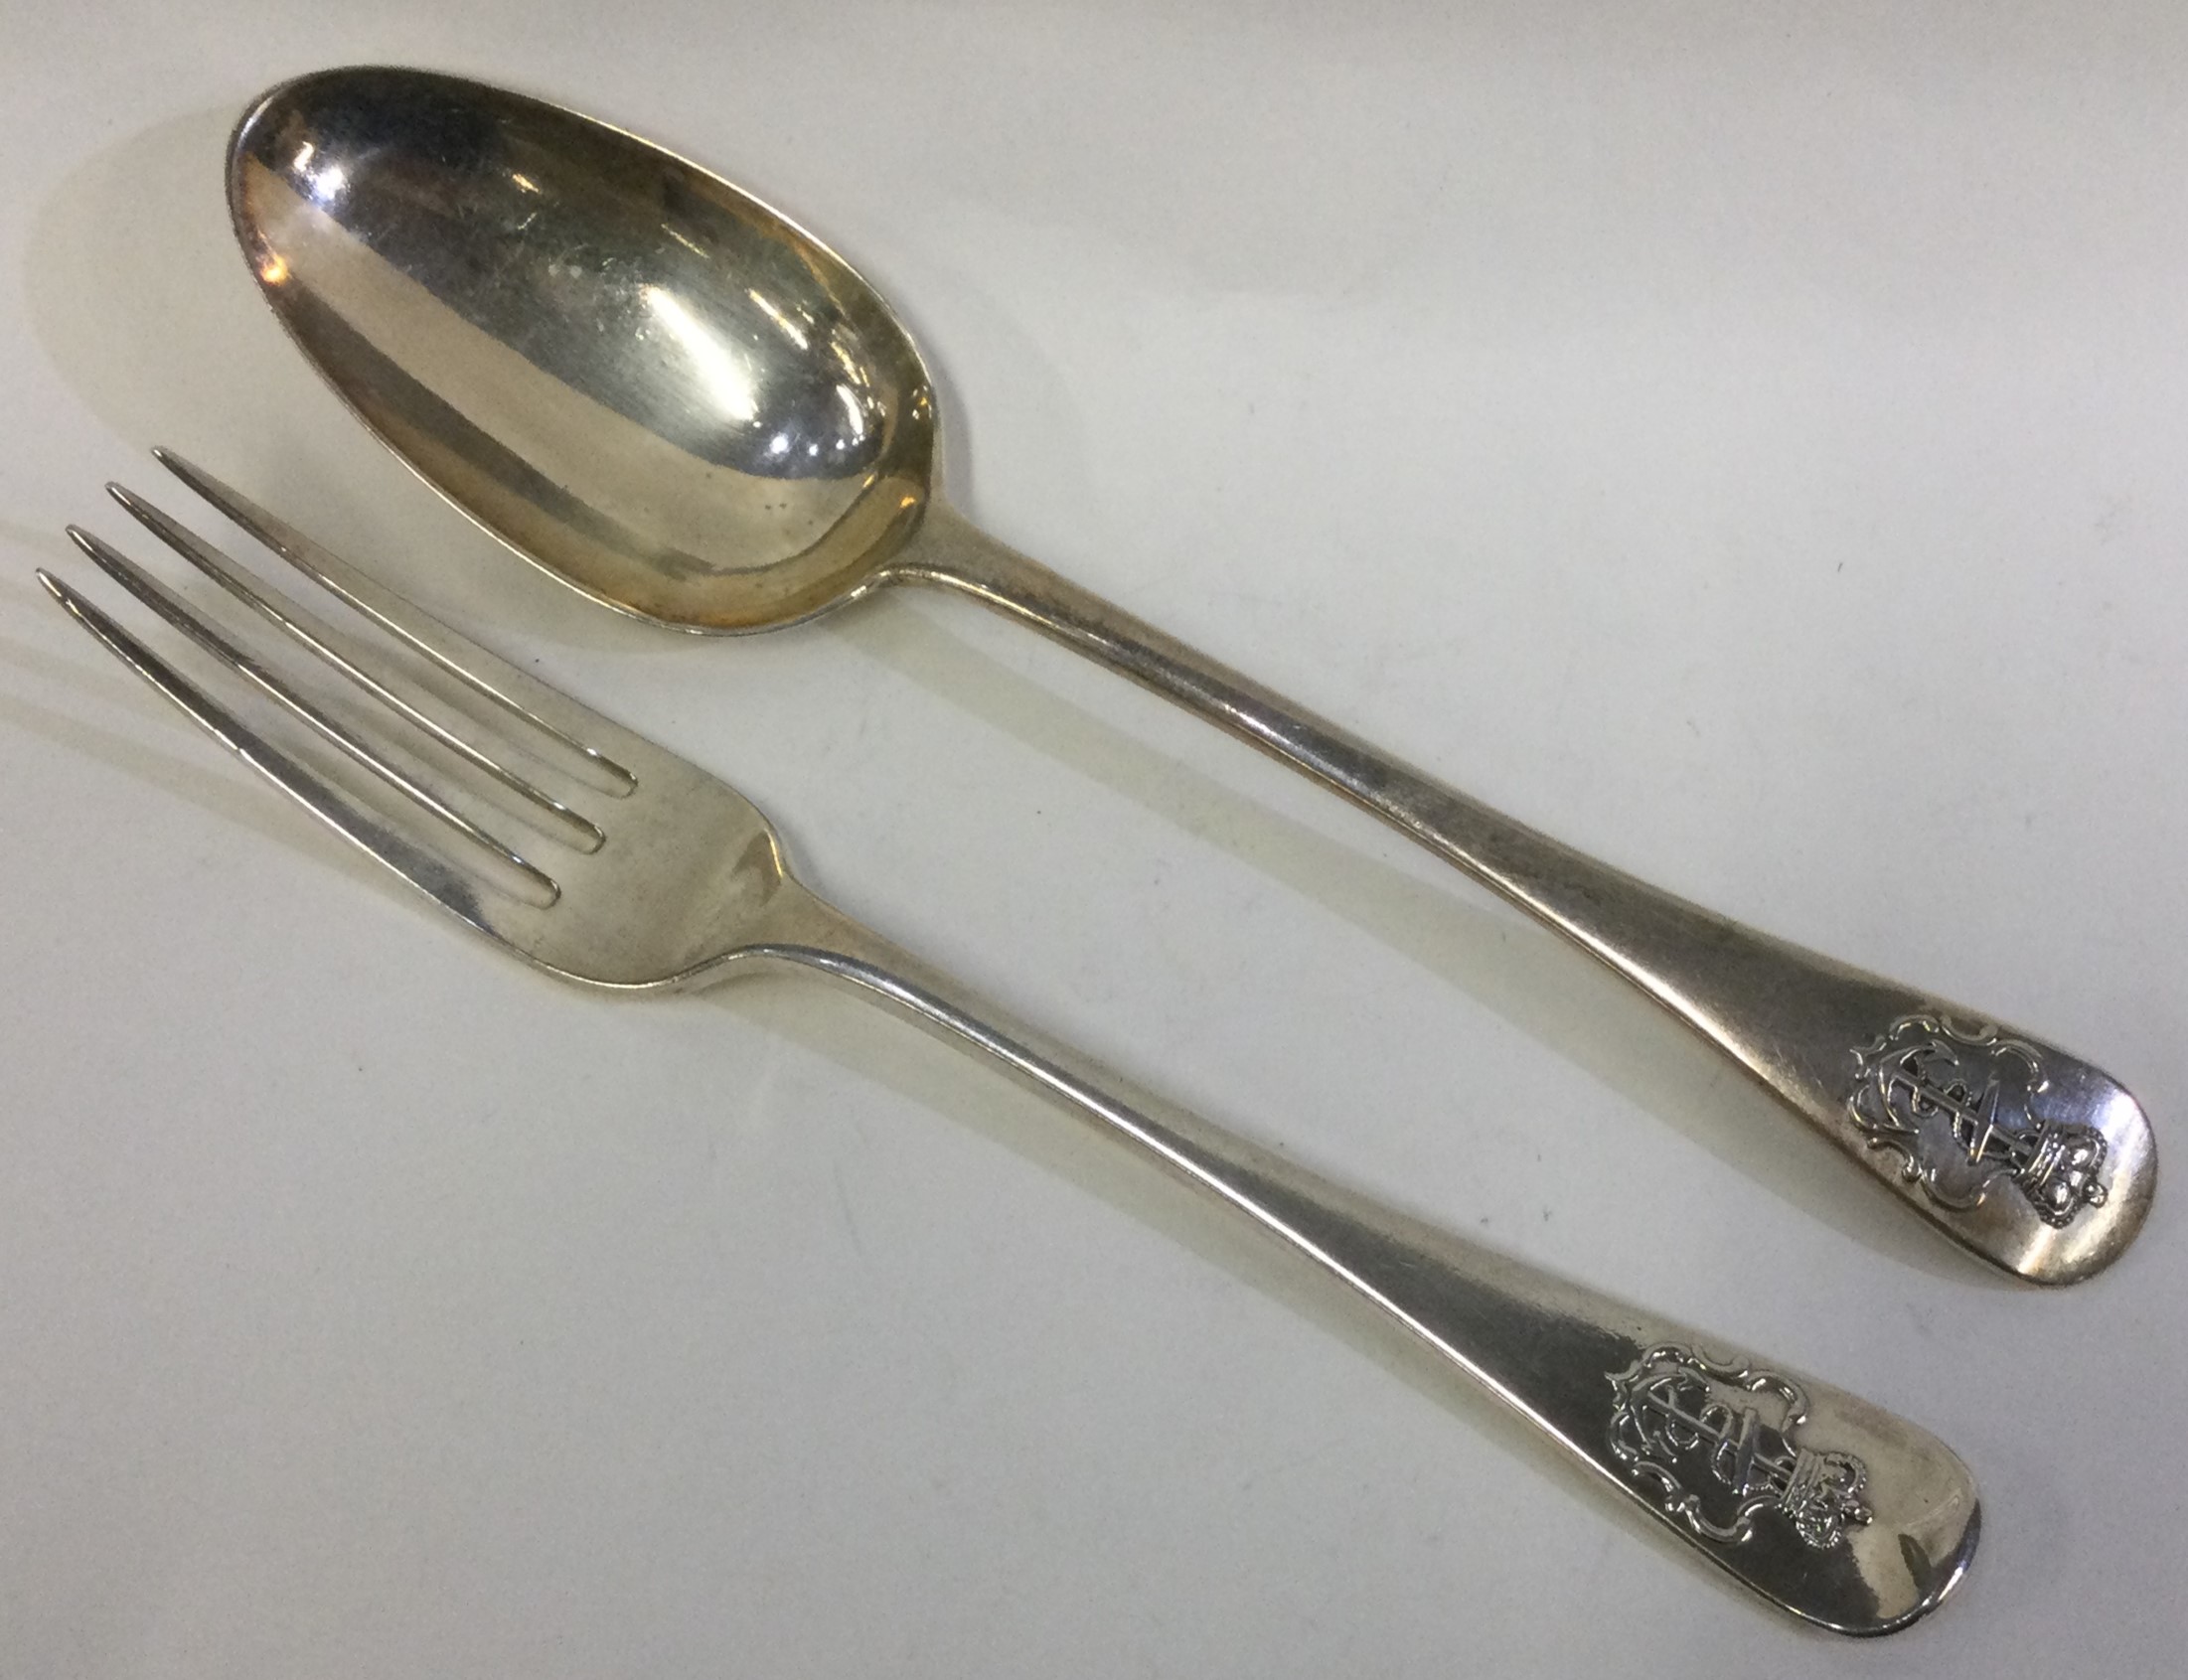 A rare silver Admiralty pattern spoon and fork.